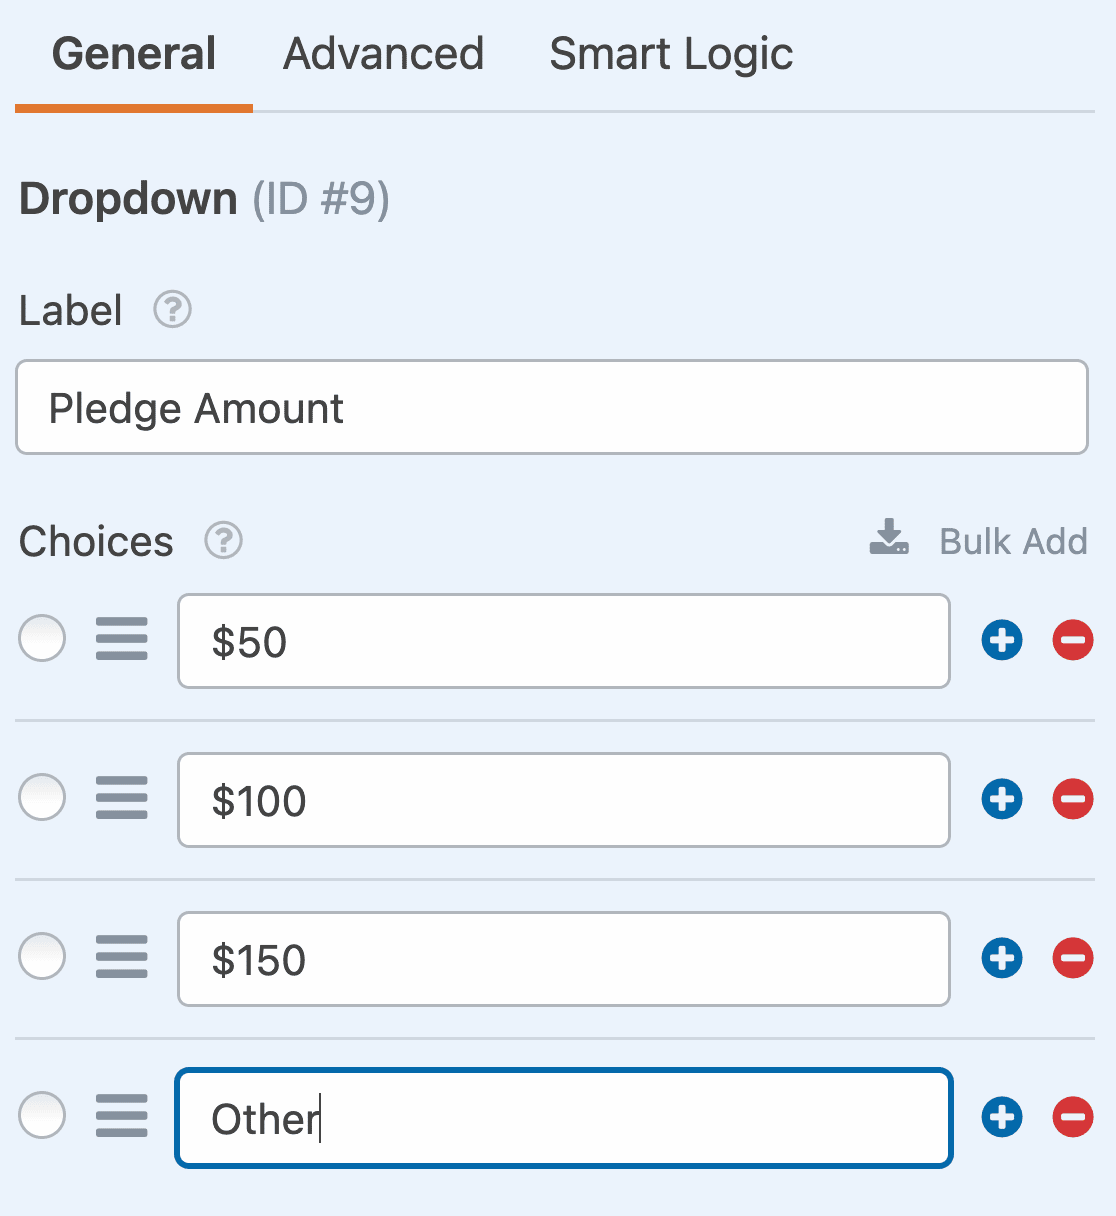 Adding an "other" choice to the Pledge Amount field